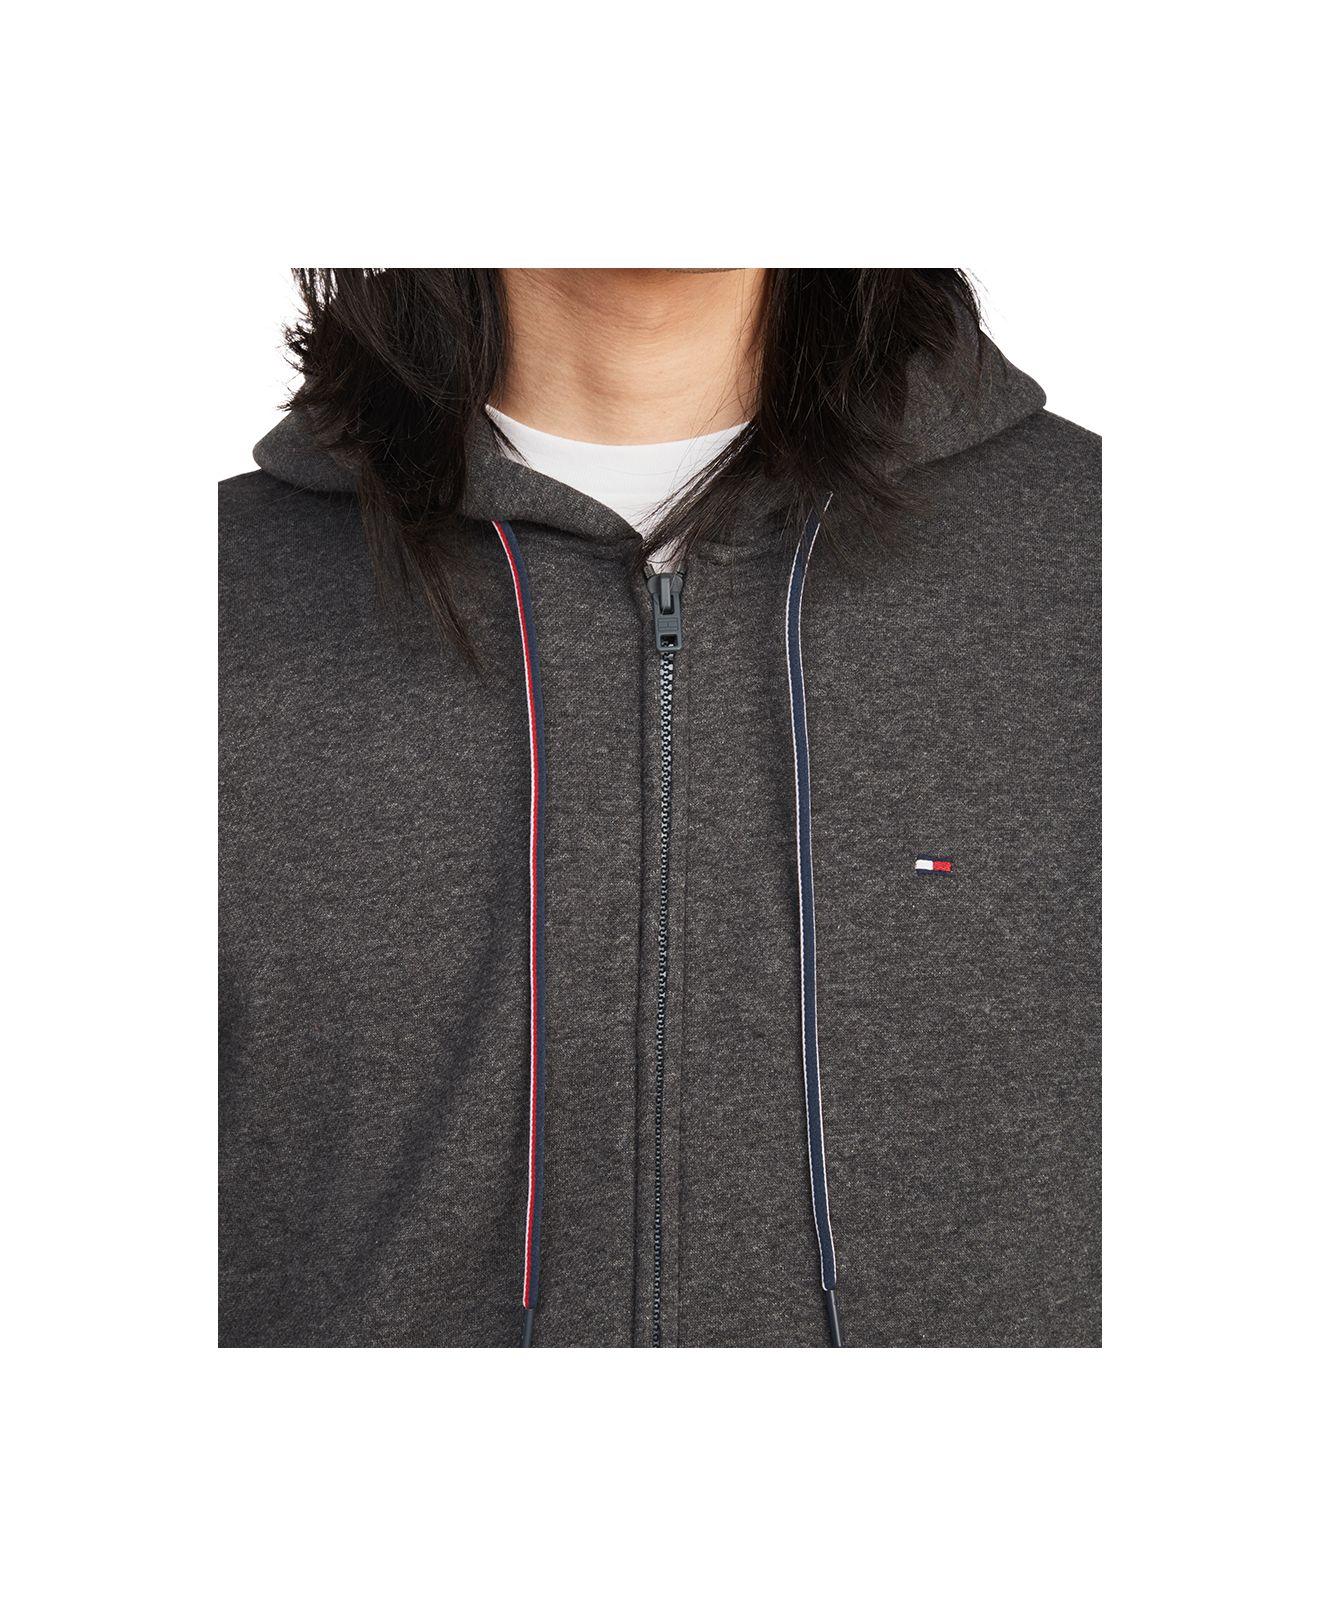 Tommy Hilfiger Cotton Plains Zip-up Hoodie in Charcoal Grey Heather (Gray)  for Men - Lyst